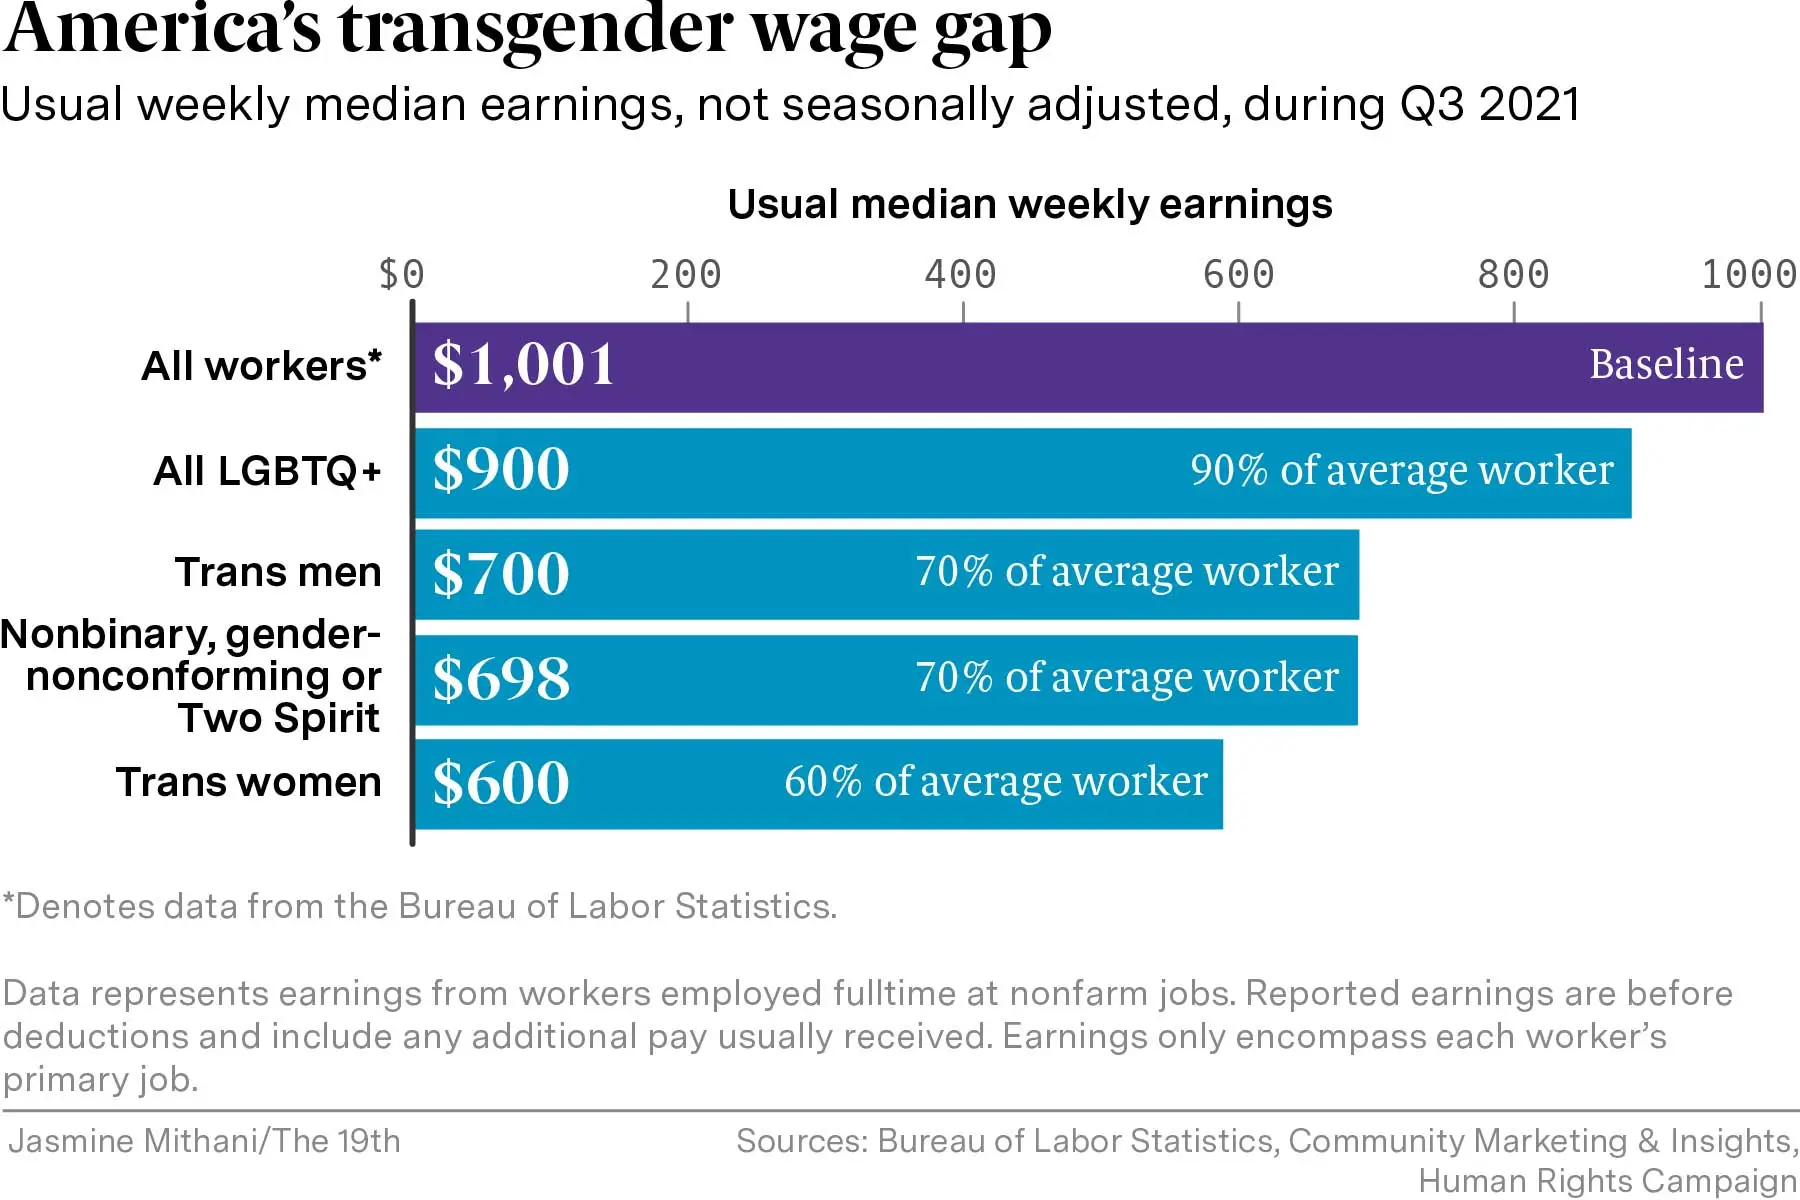 Bar chart of weekly median earnings during Q3 2021 showing trans women make 60 percent of the average worker and that nonbinary workers and trans men make 70 percent of the average worker.